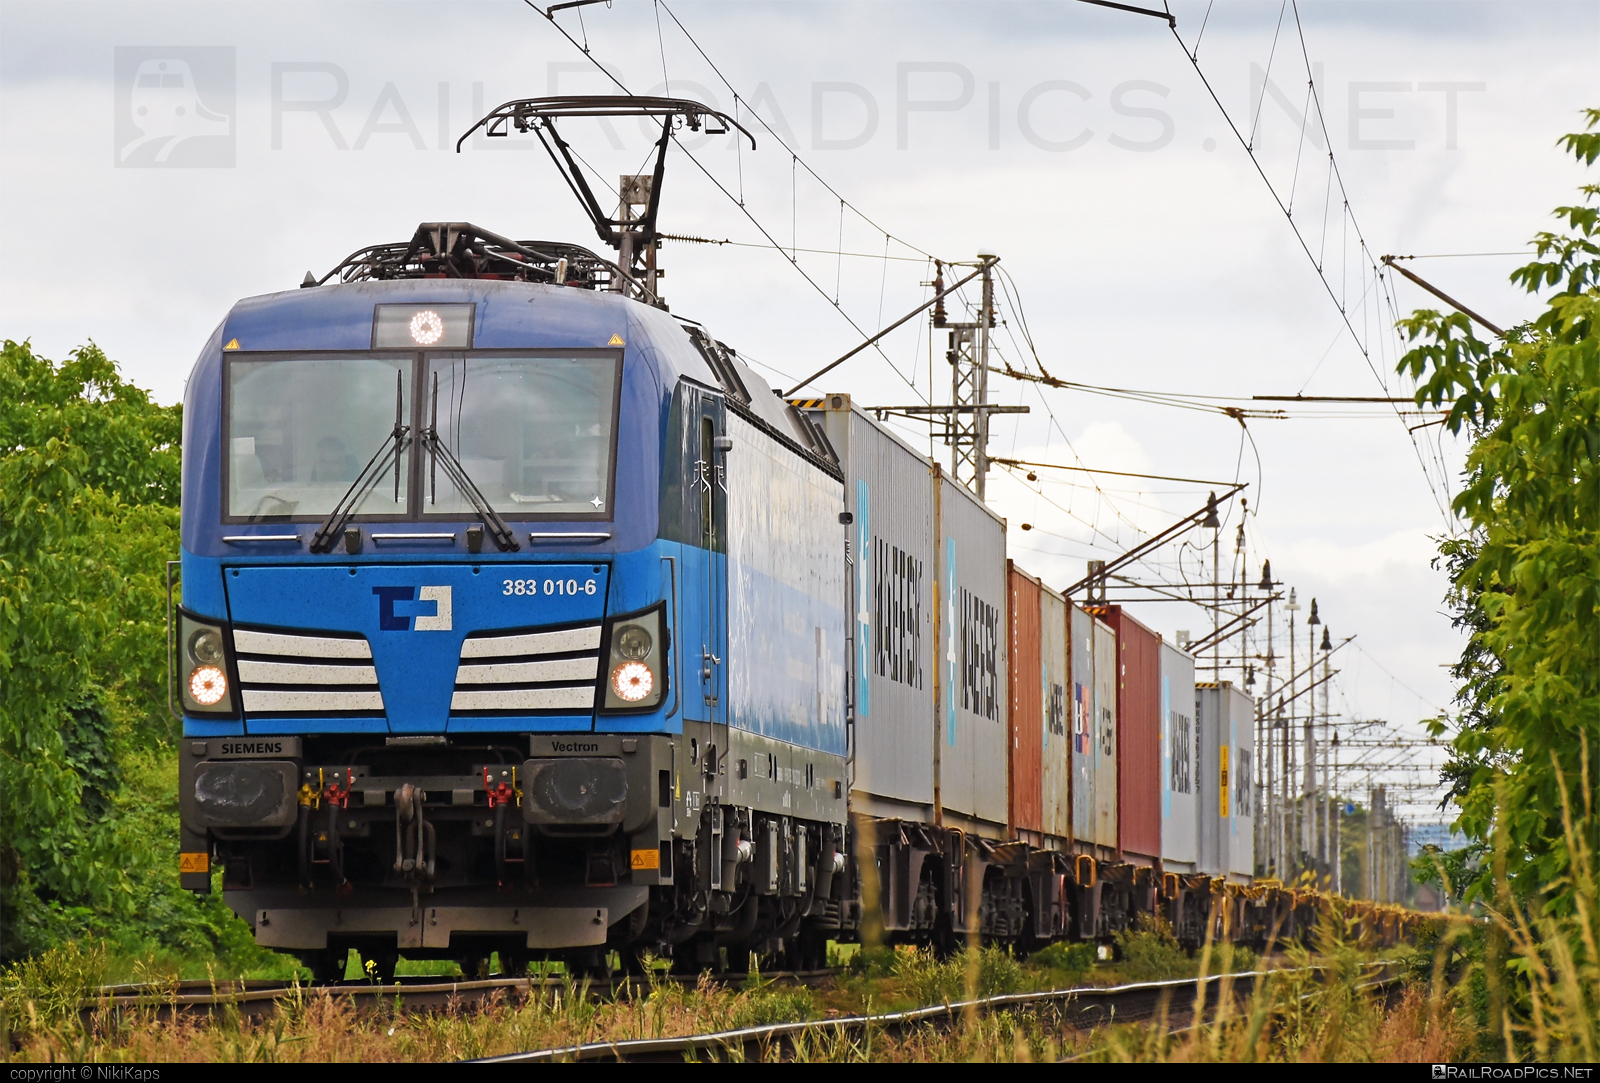 Siemens Vectron MS - 383 010-6 operated by ČD Cargo, a.s. #cdcargo #container #flatwagon #maersk #siemens #siemensVectron #siemensVectronMS #vectron #vectronMS